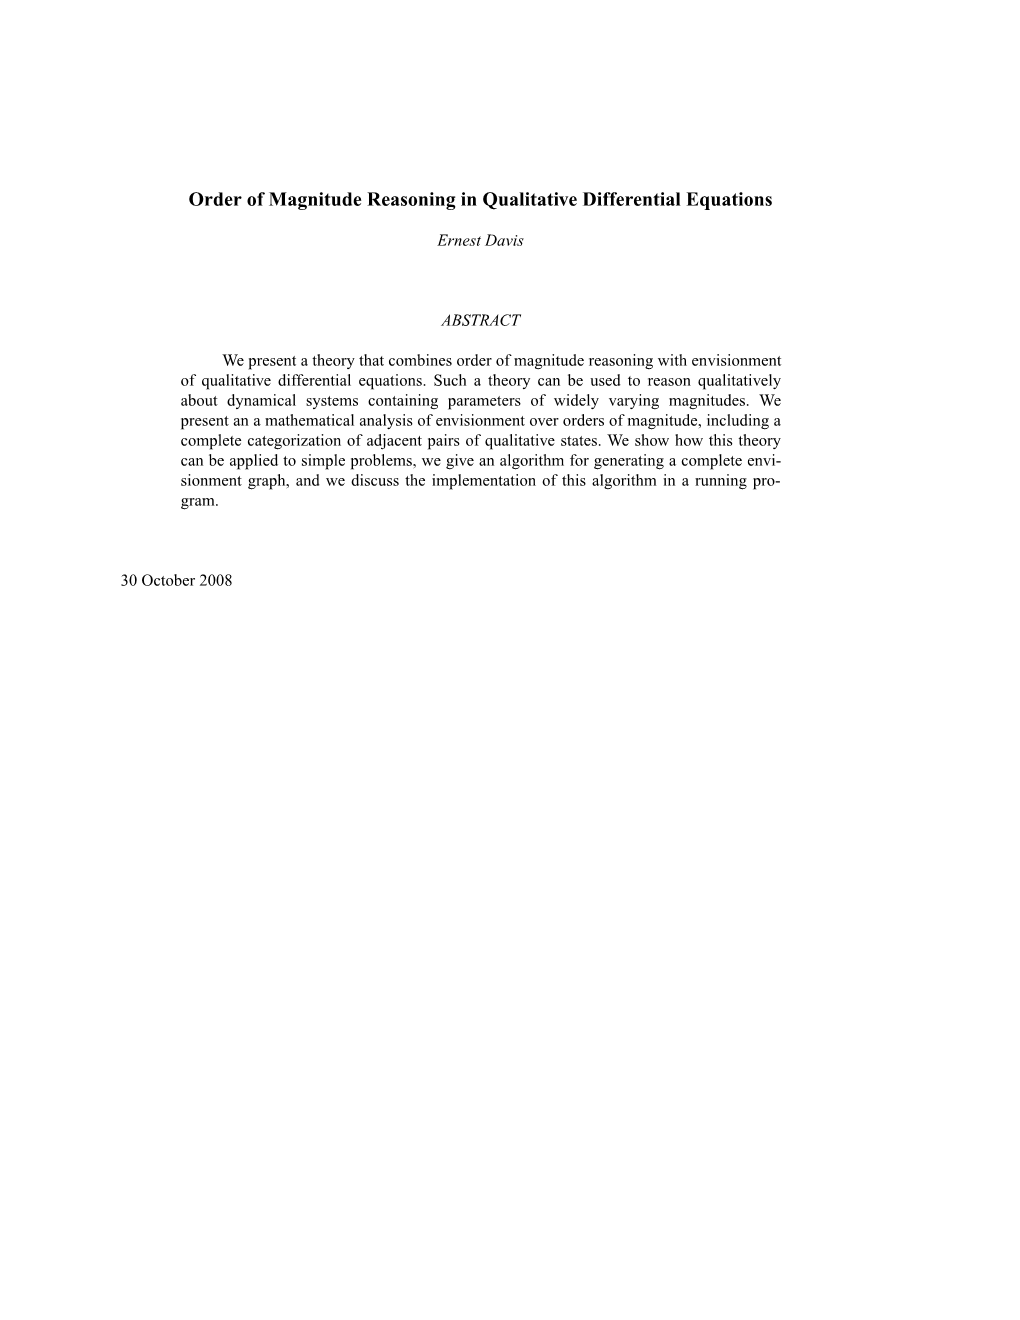 Order of Magnitude Reasoning in Qualitative Differential Equations